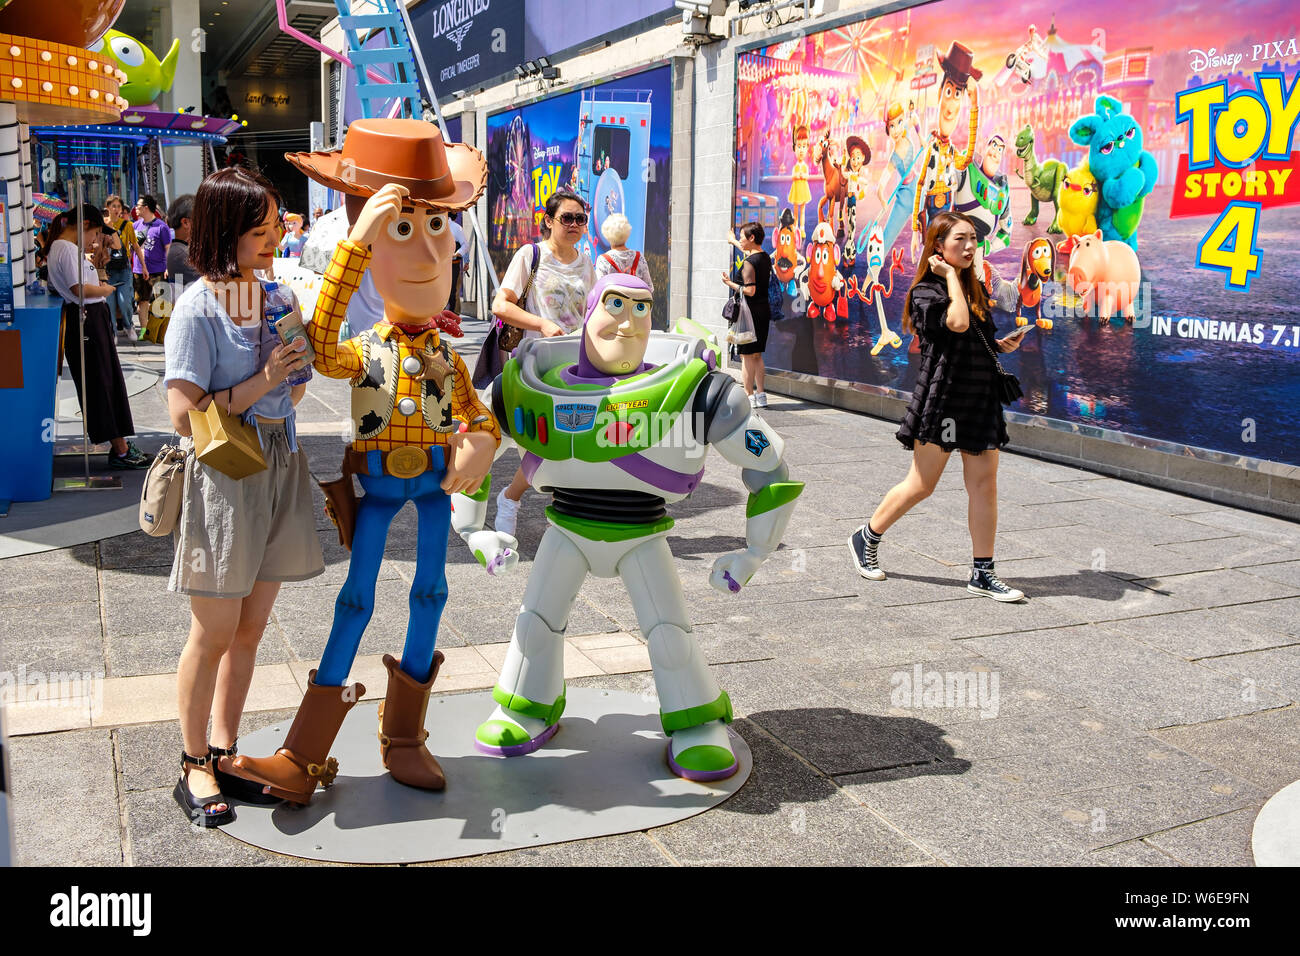 A woman posses next to replicas of Sheriff Woody and Buzz Lightyear during the Carnival.Toy Story 4 is celebrated with a themed carnival of different games and challenges at Hong Kong Harbour City. Stock Photo